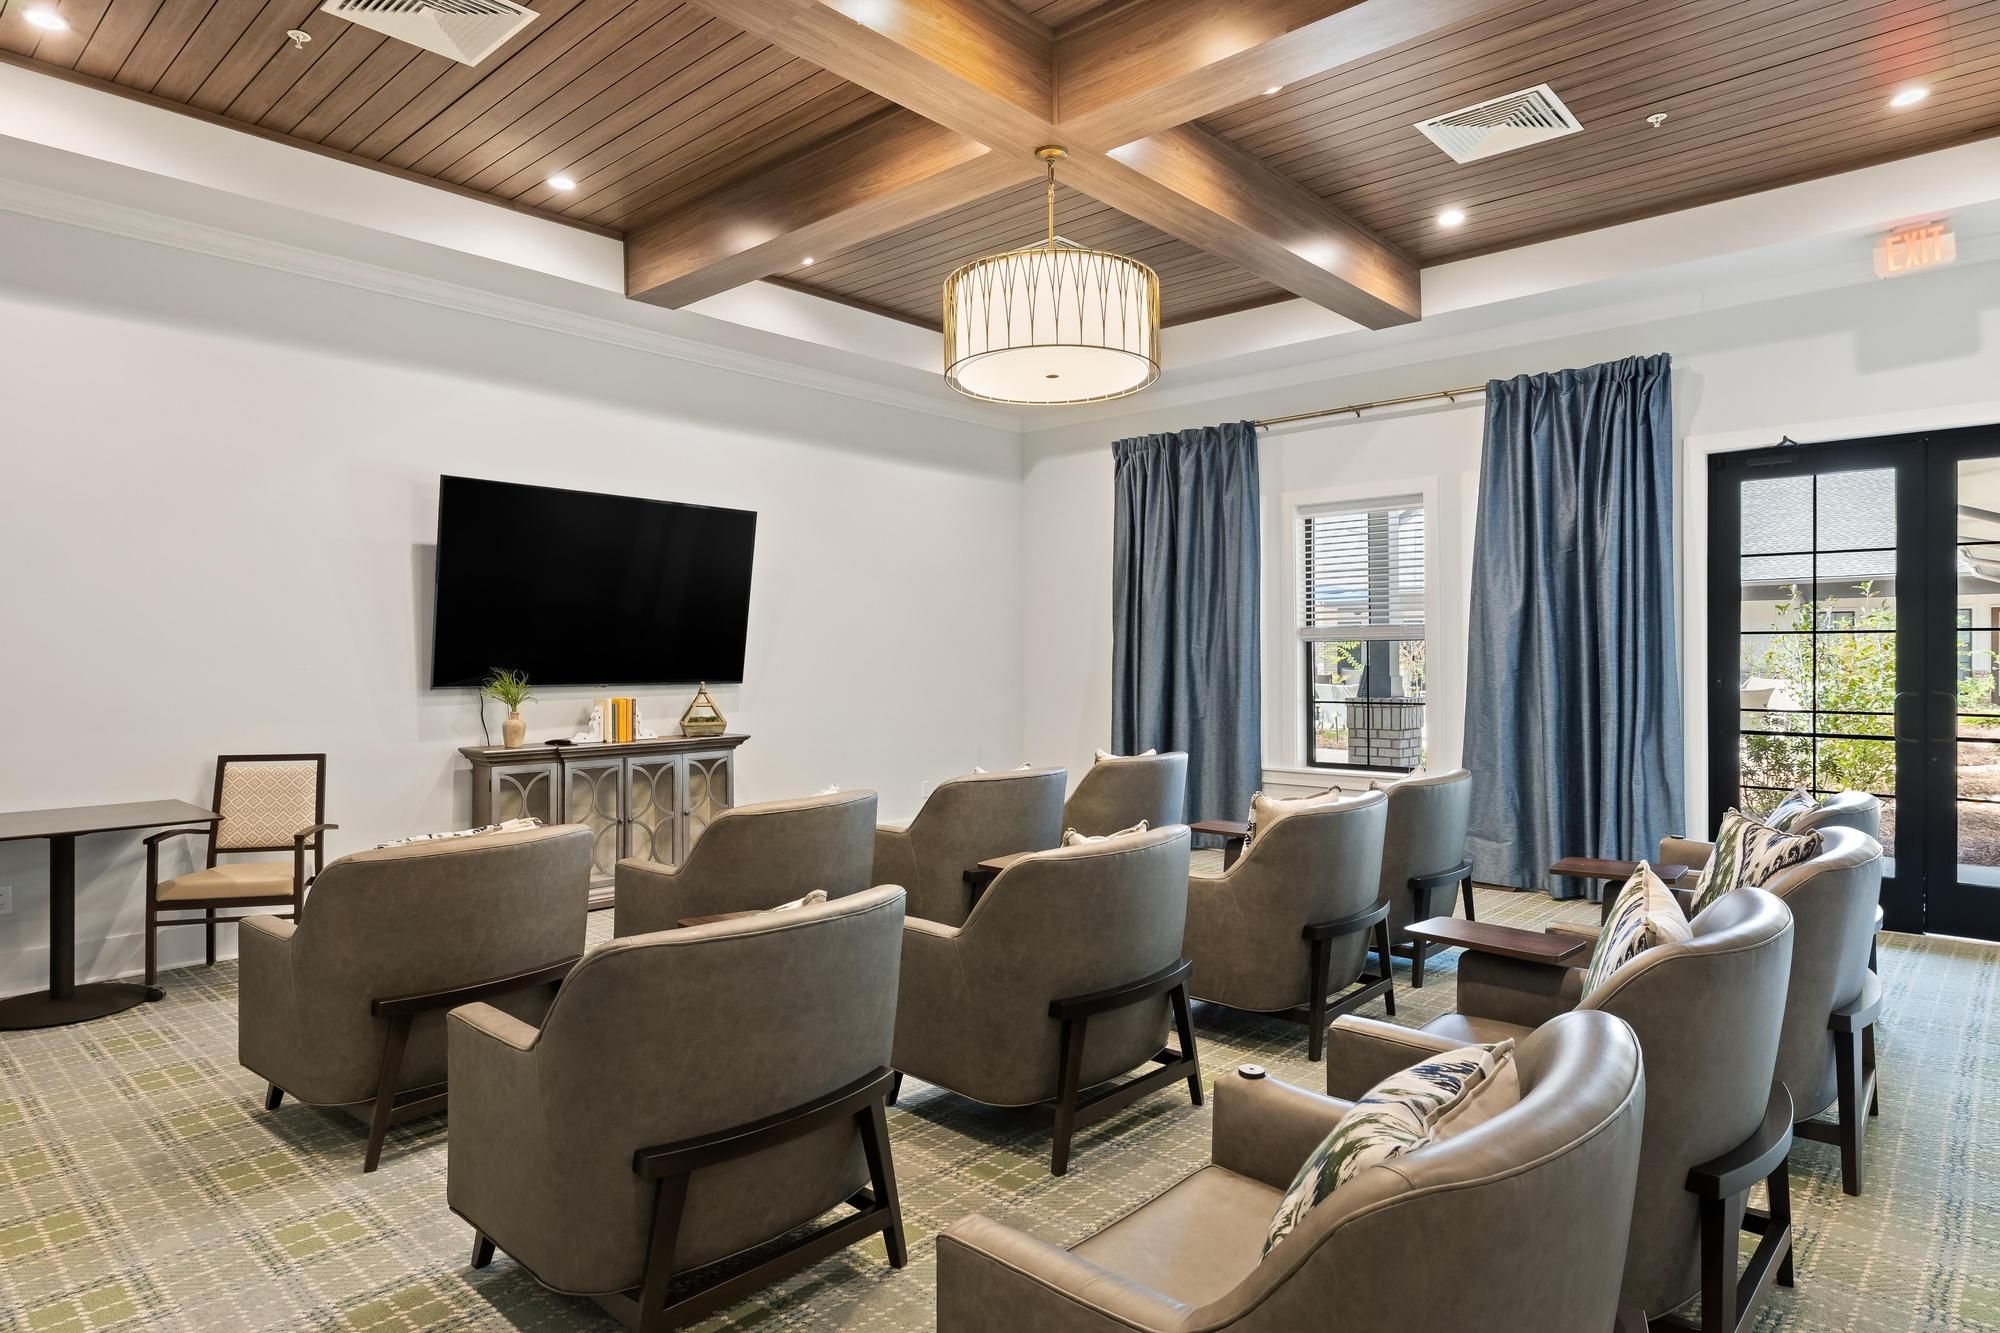 The Preserve at Meridian senior living community movie theater with big screen and surround sound